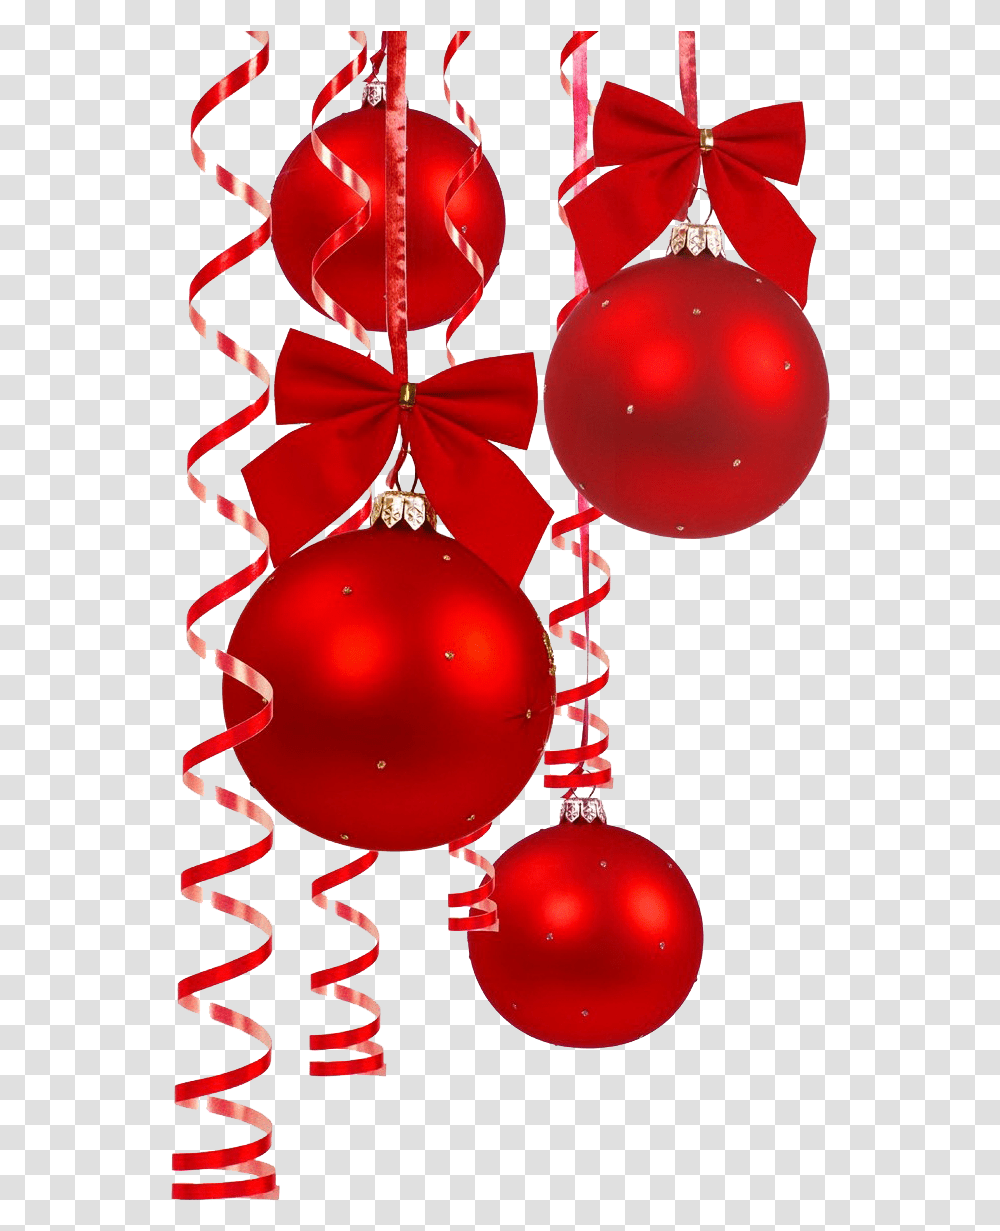 Baubles Baublespng Images Pluspng Christmas Baubles Background, Balloon, Plant, Tree, Logo Transparent Png